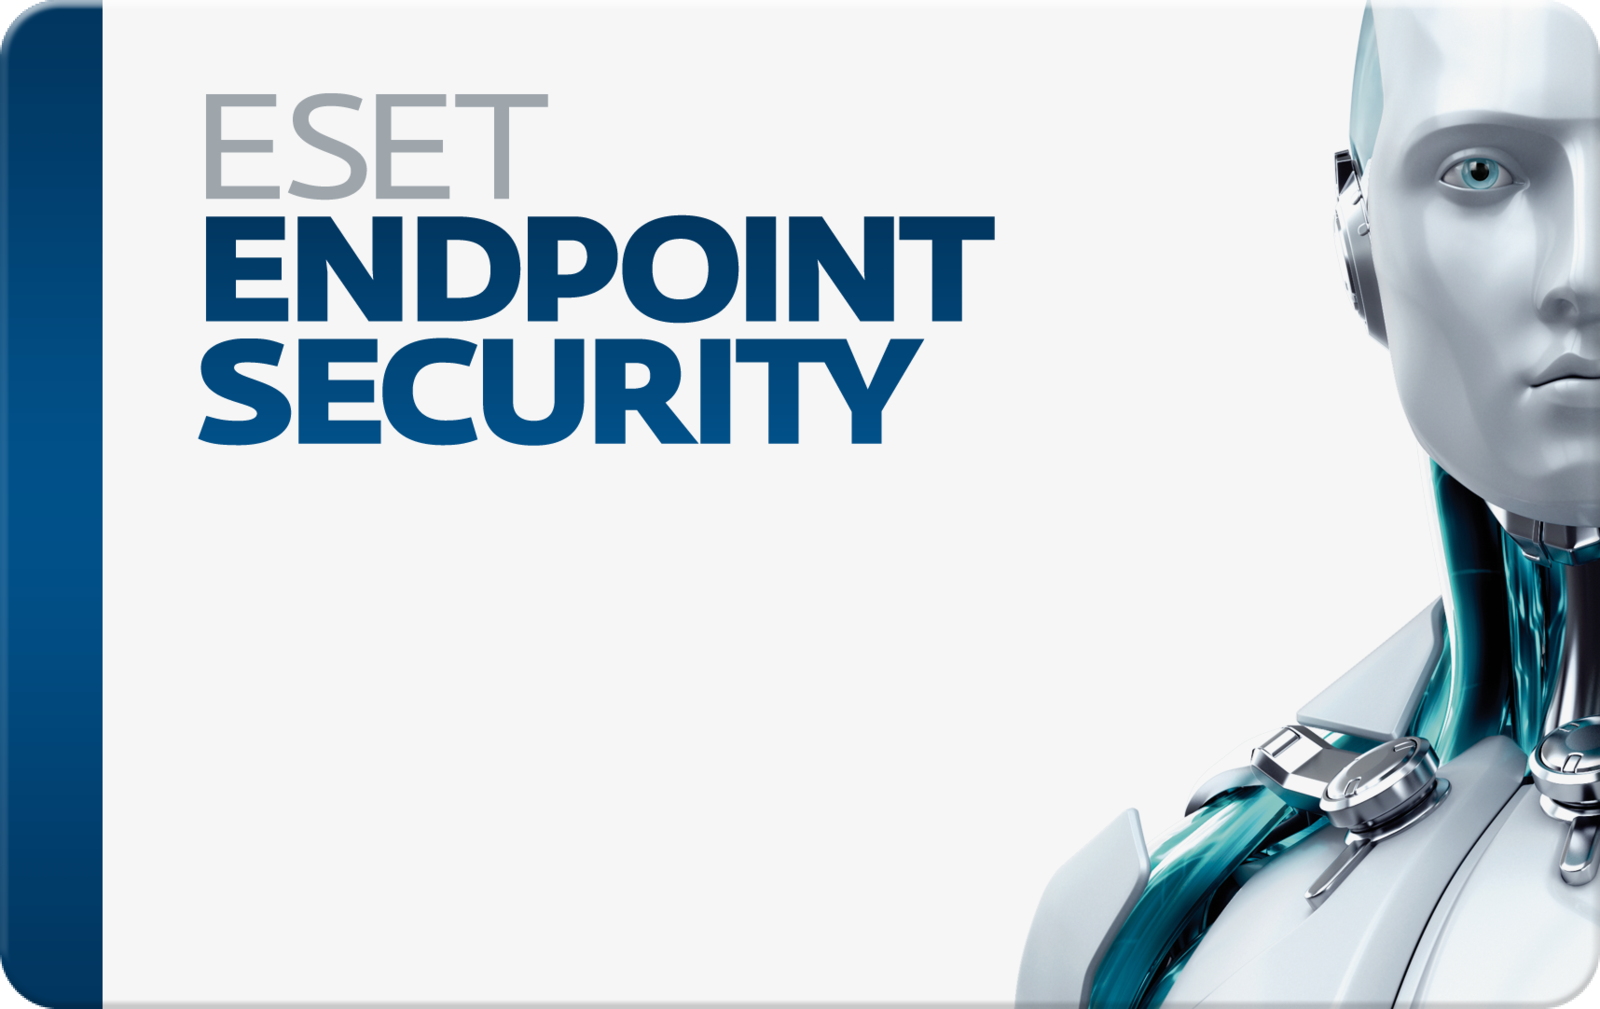 ESET Endpoint Security 10.1.2046.0 download the new